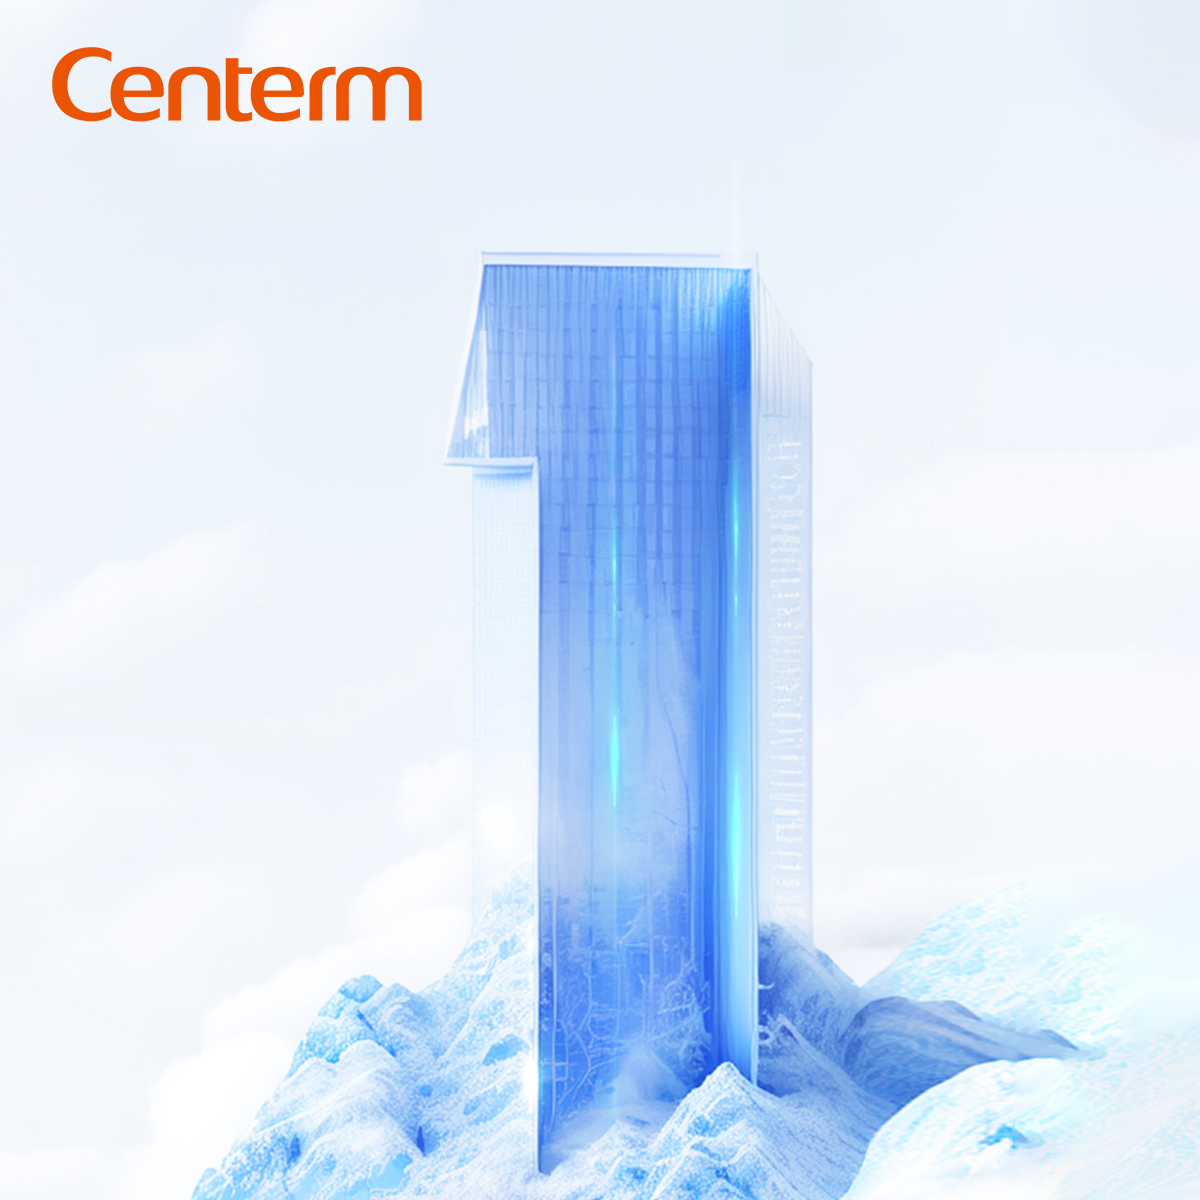 Centerm Takes the Top Spot in the Global Thin Client Market